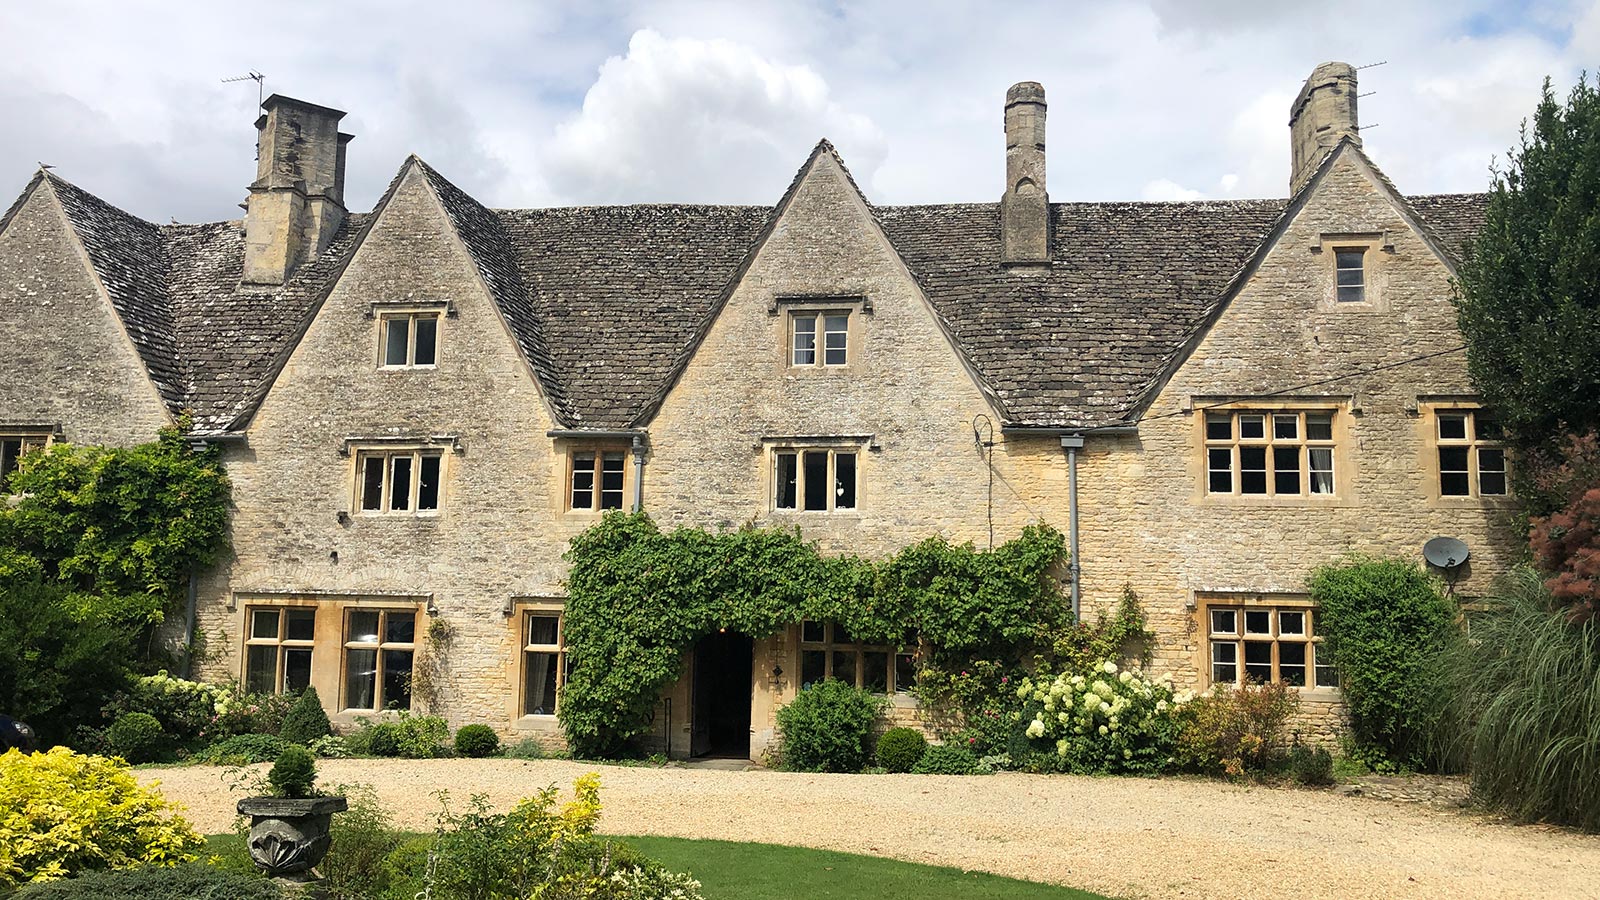 Property in Oxfordshire